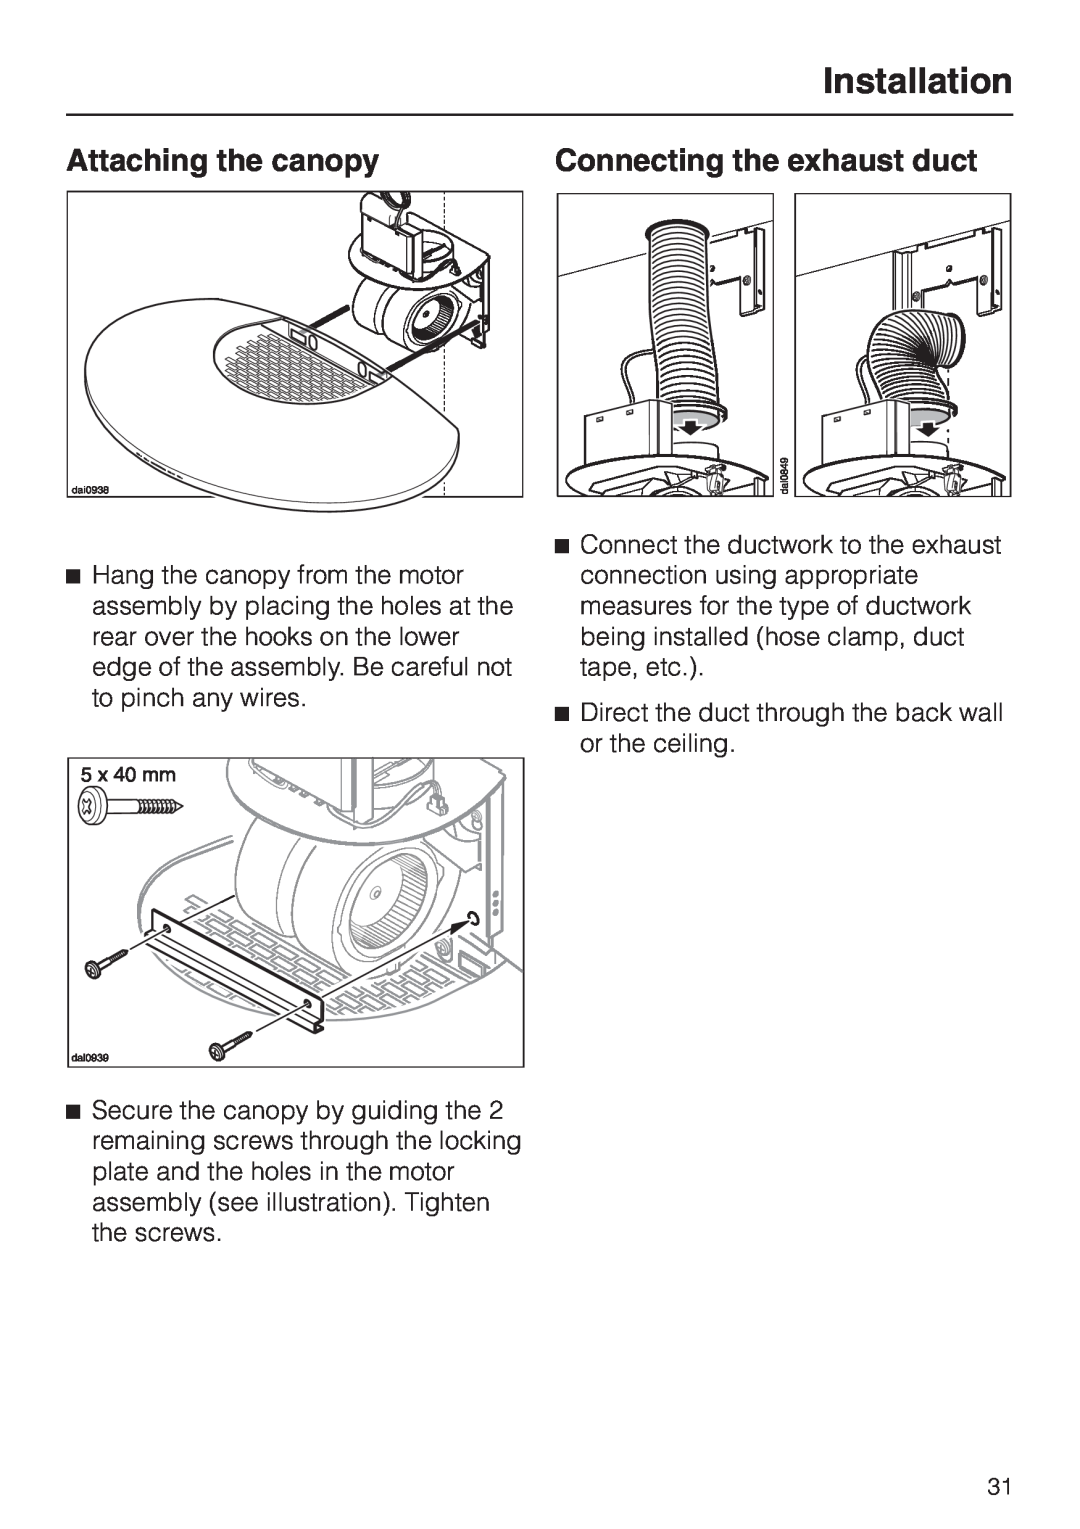 Miele DA239-3 installation instructions Attaching the canopy, Connecting the exhaust duct, Installation 